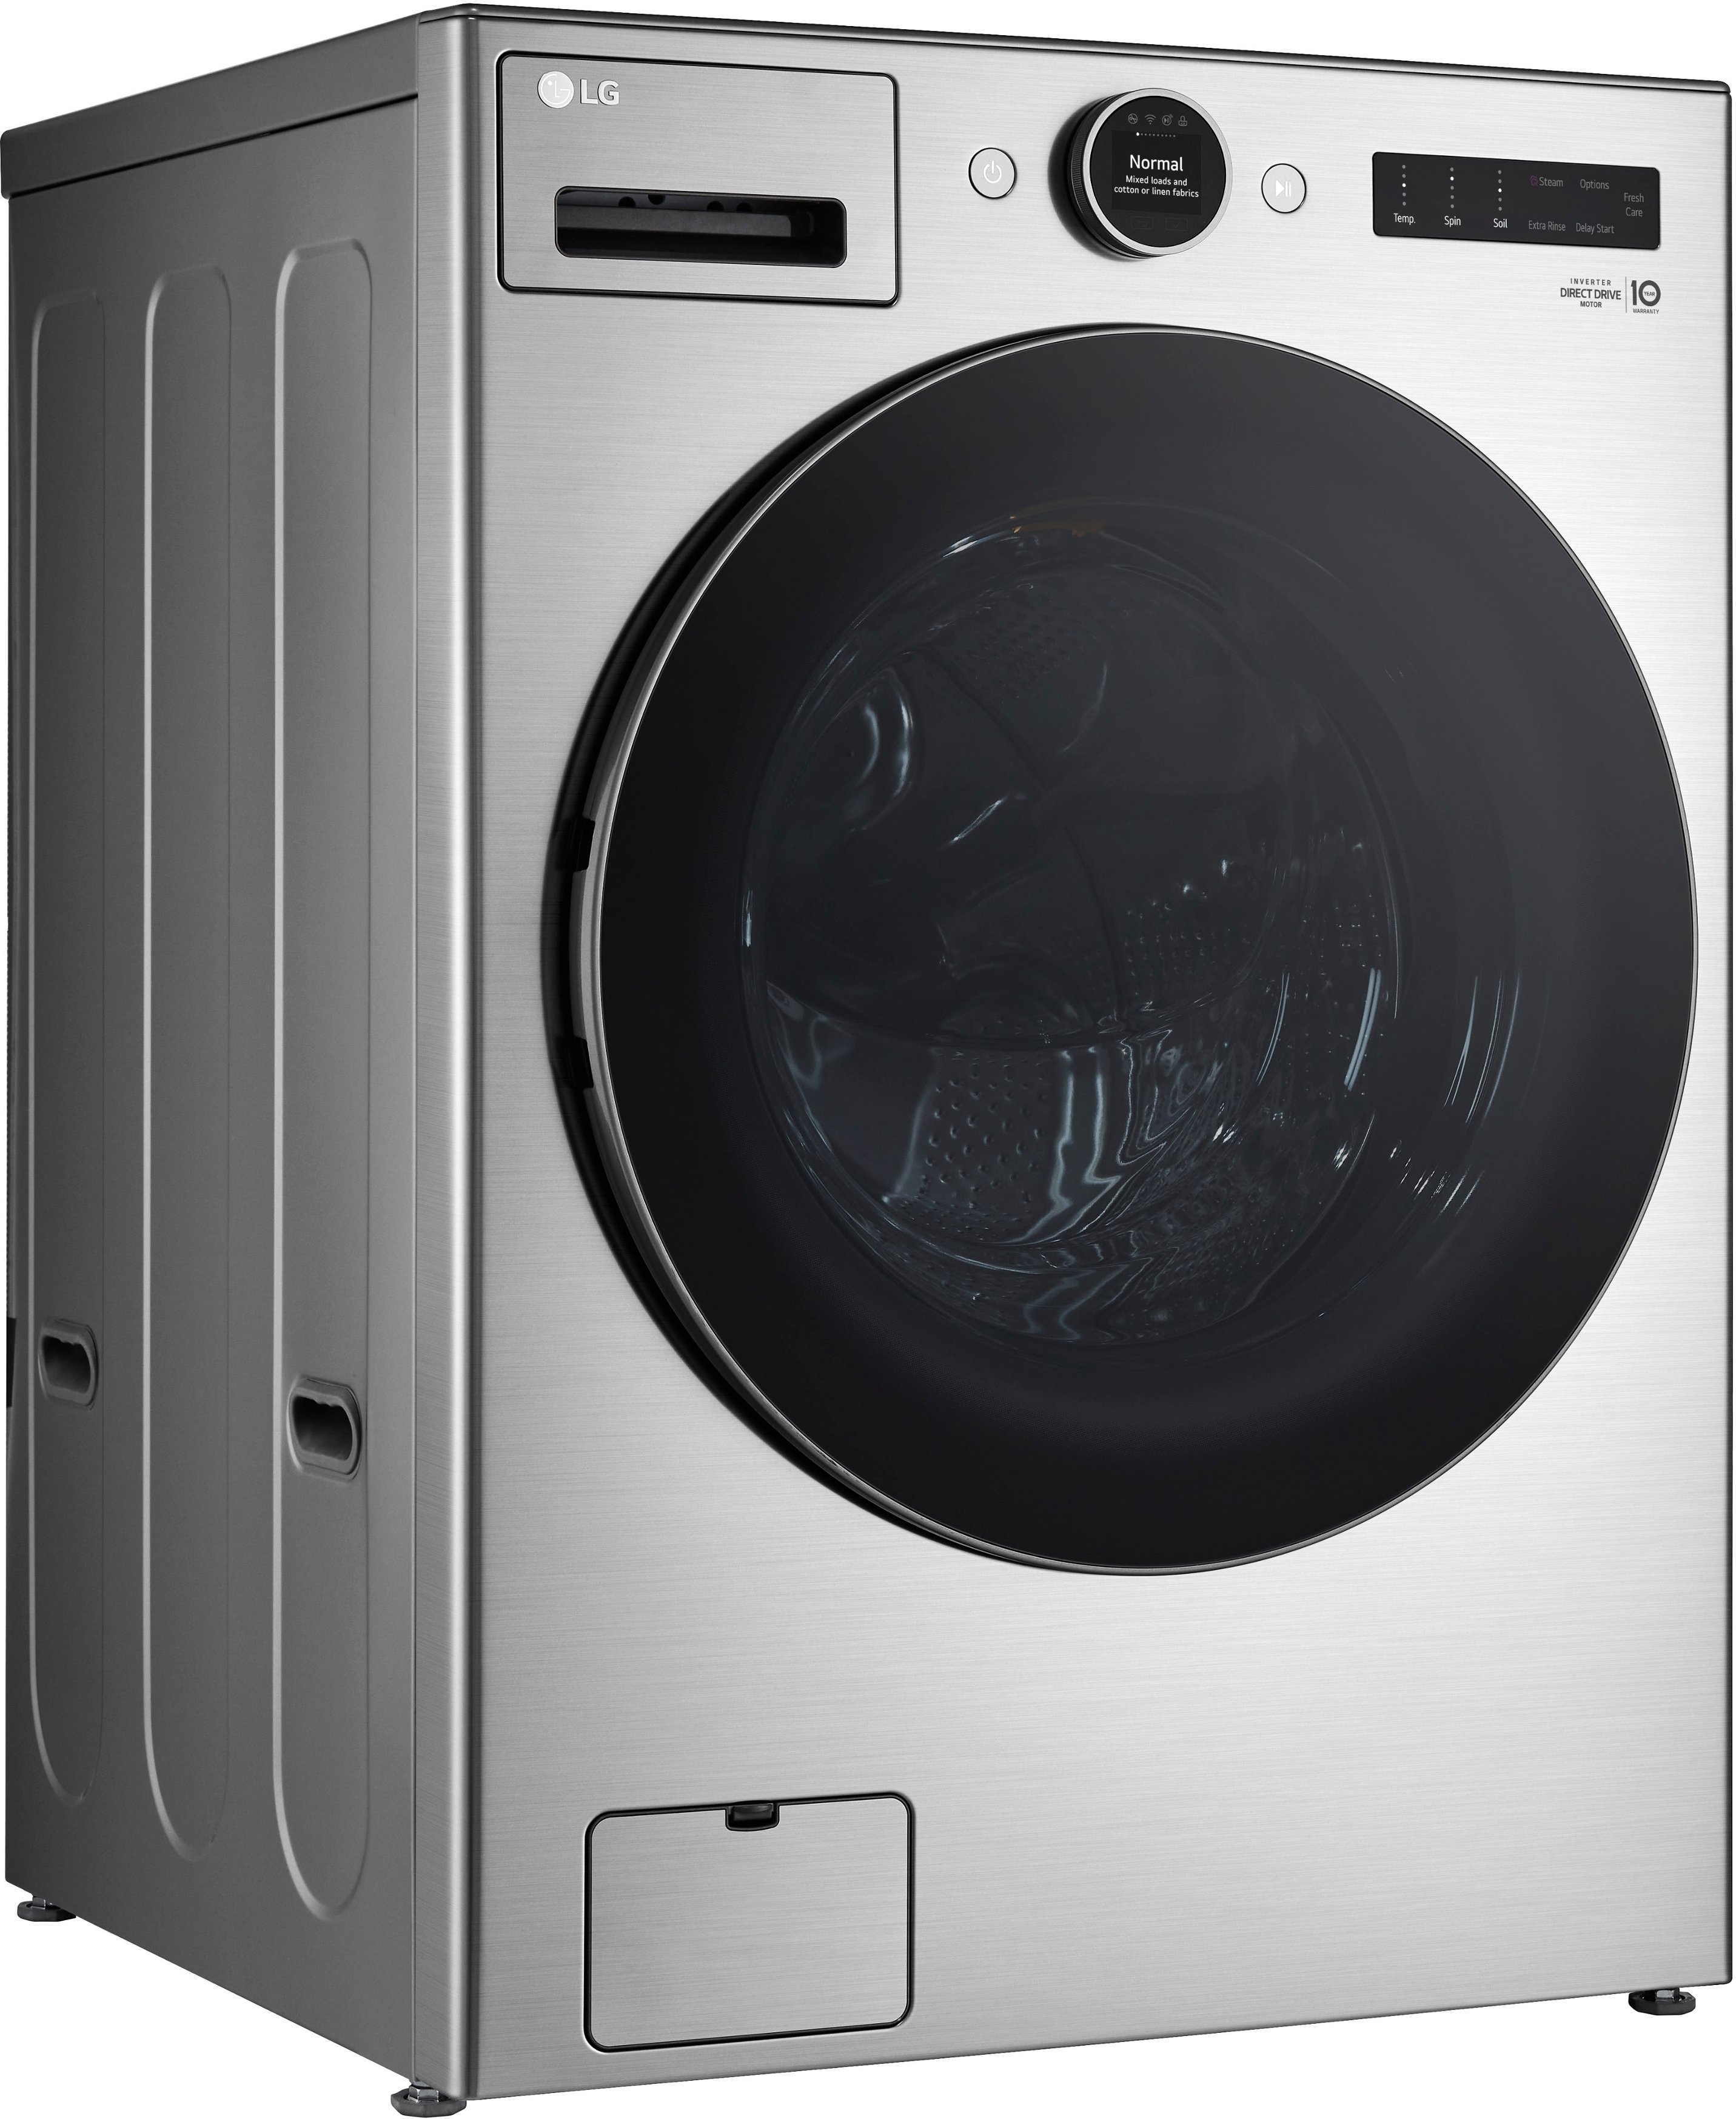 Angle View: LG - 4.5 Cu. Ft. High-Efficiency Stackable Smart Front Load Washer with Steam and and ezDispense - Graphite Steel